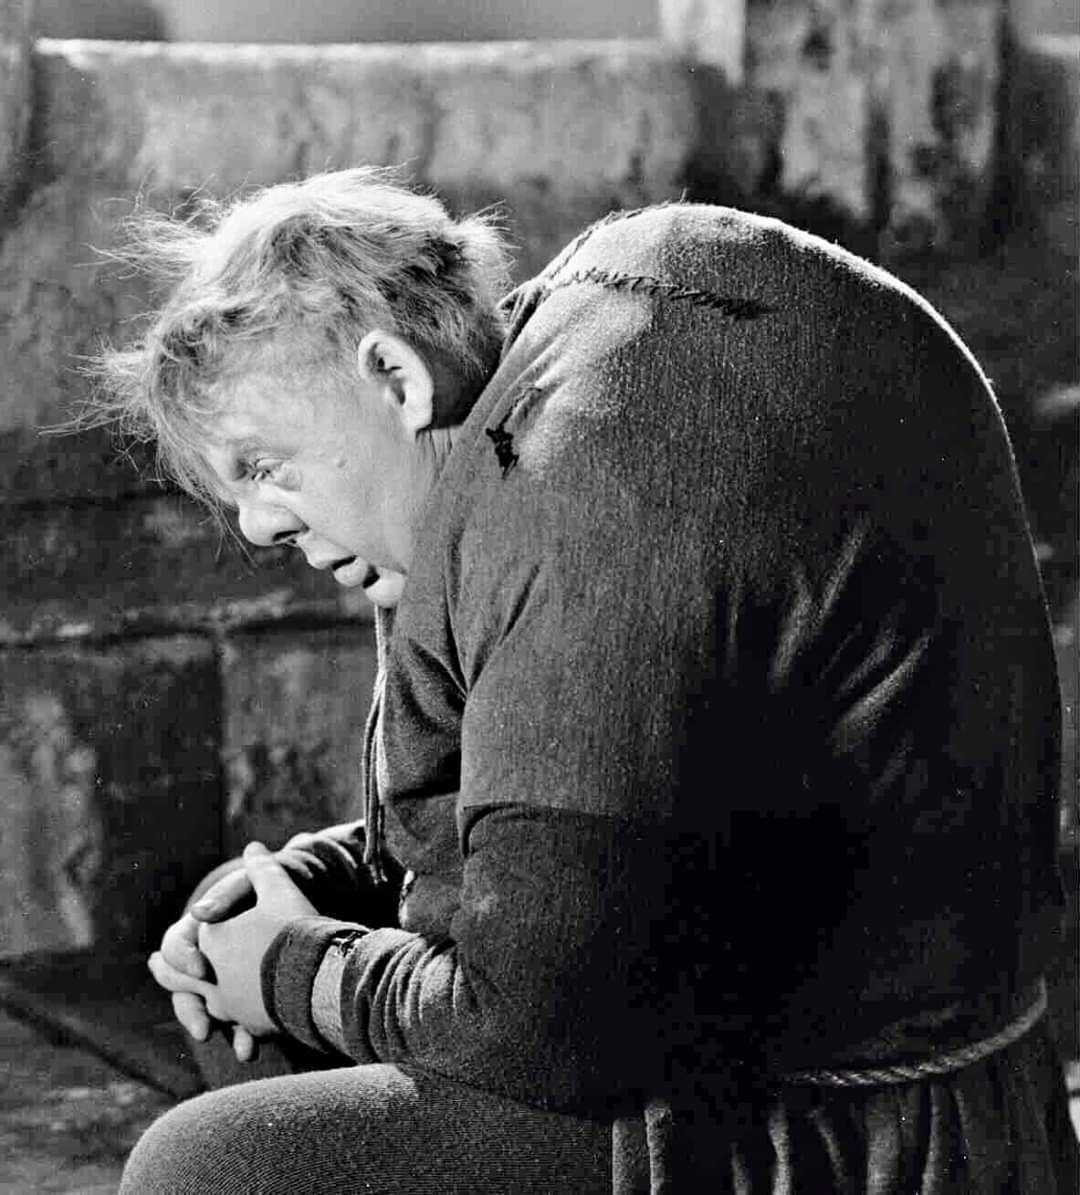 Why was I not made of stone?

William Dieterle's The Hunchback of Notre Dame (1939).

#CharlesLaughton